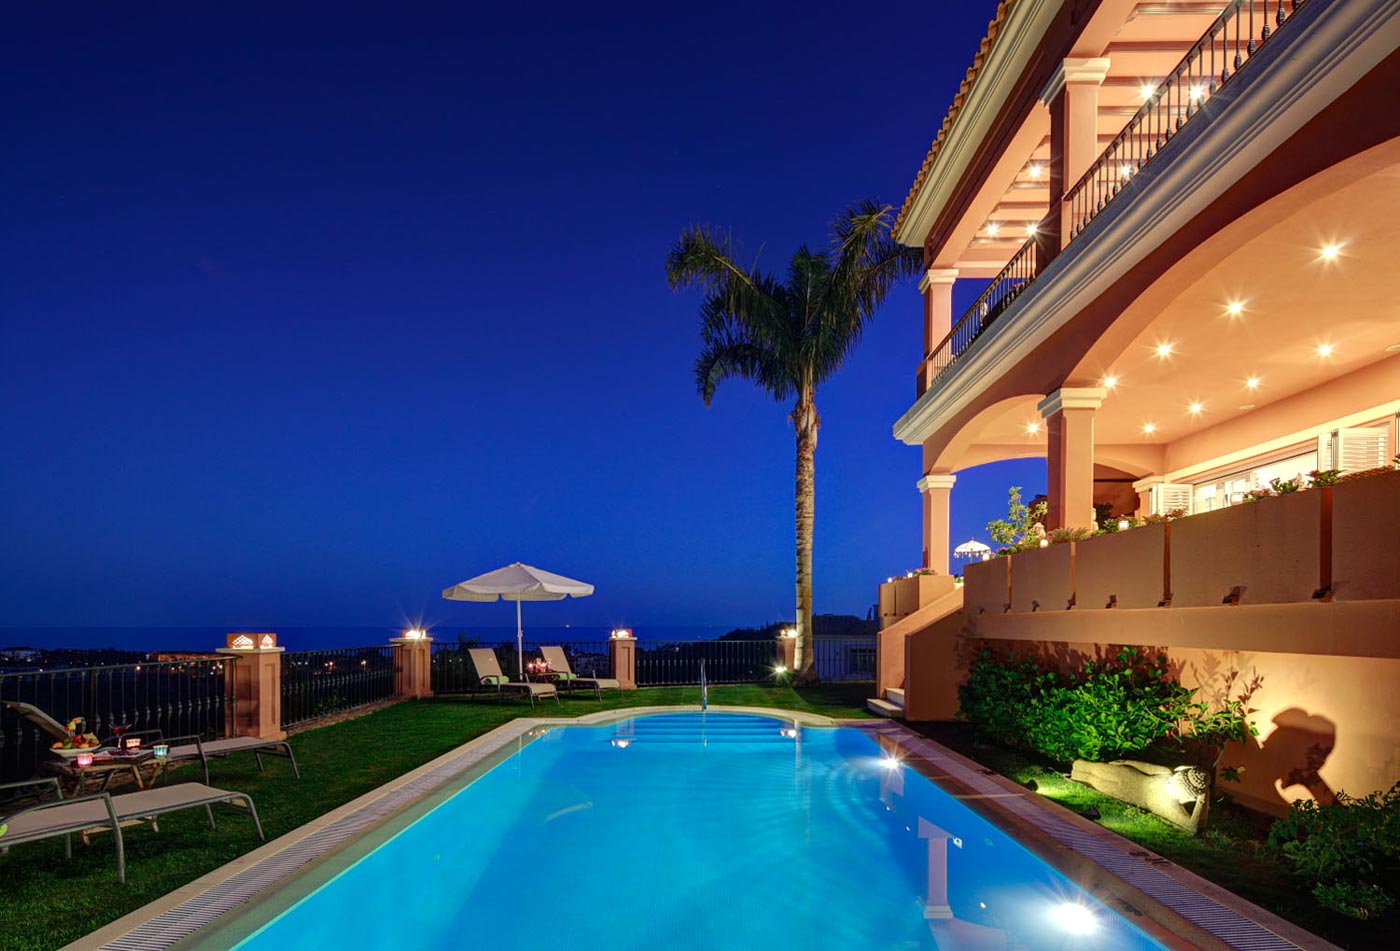 The Marbella Heights - A luxury villa hotel that combines stunning